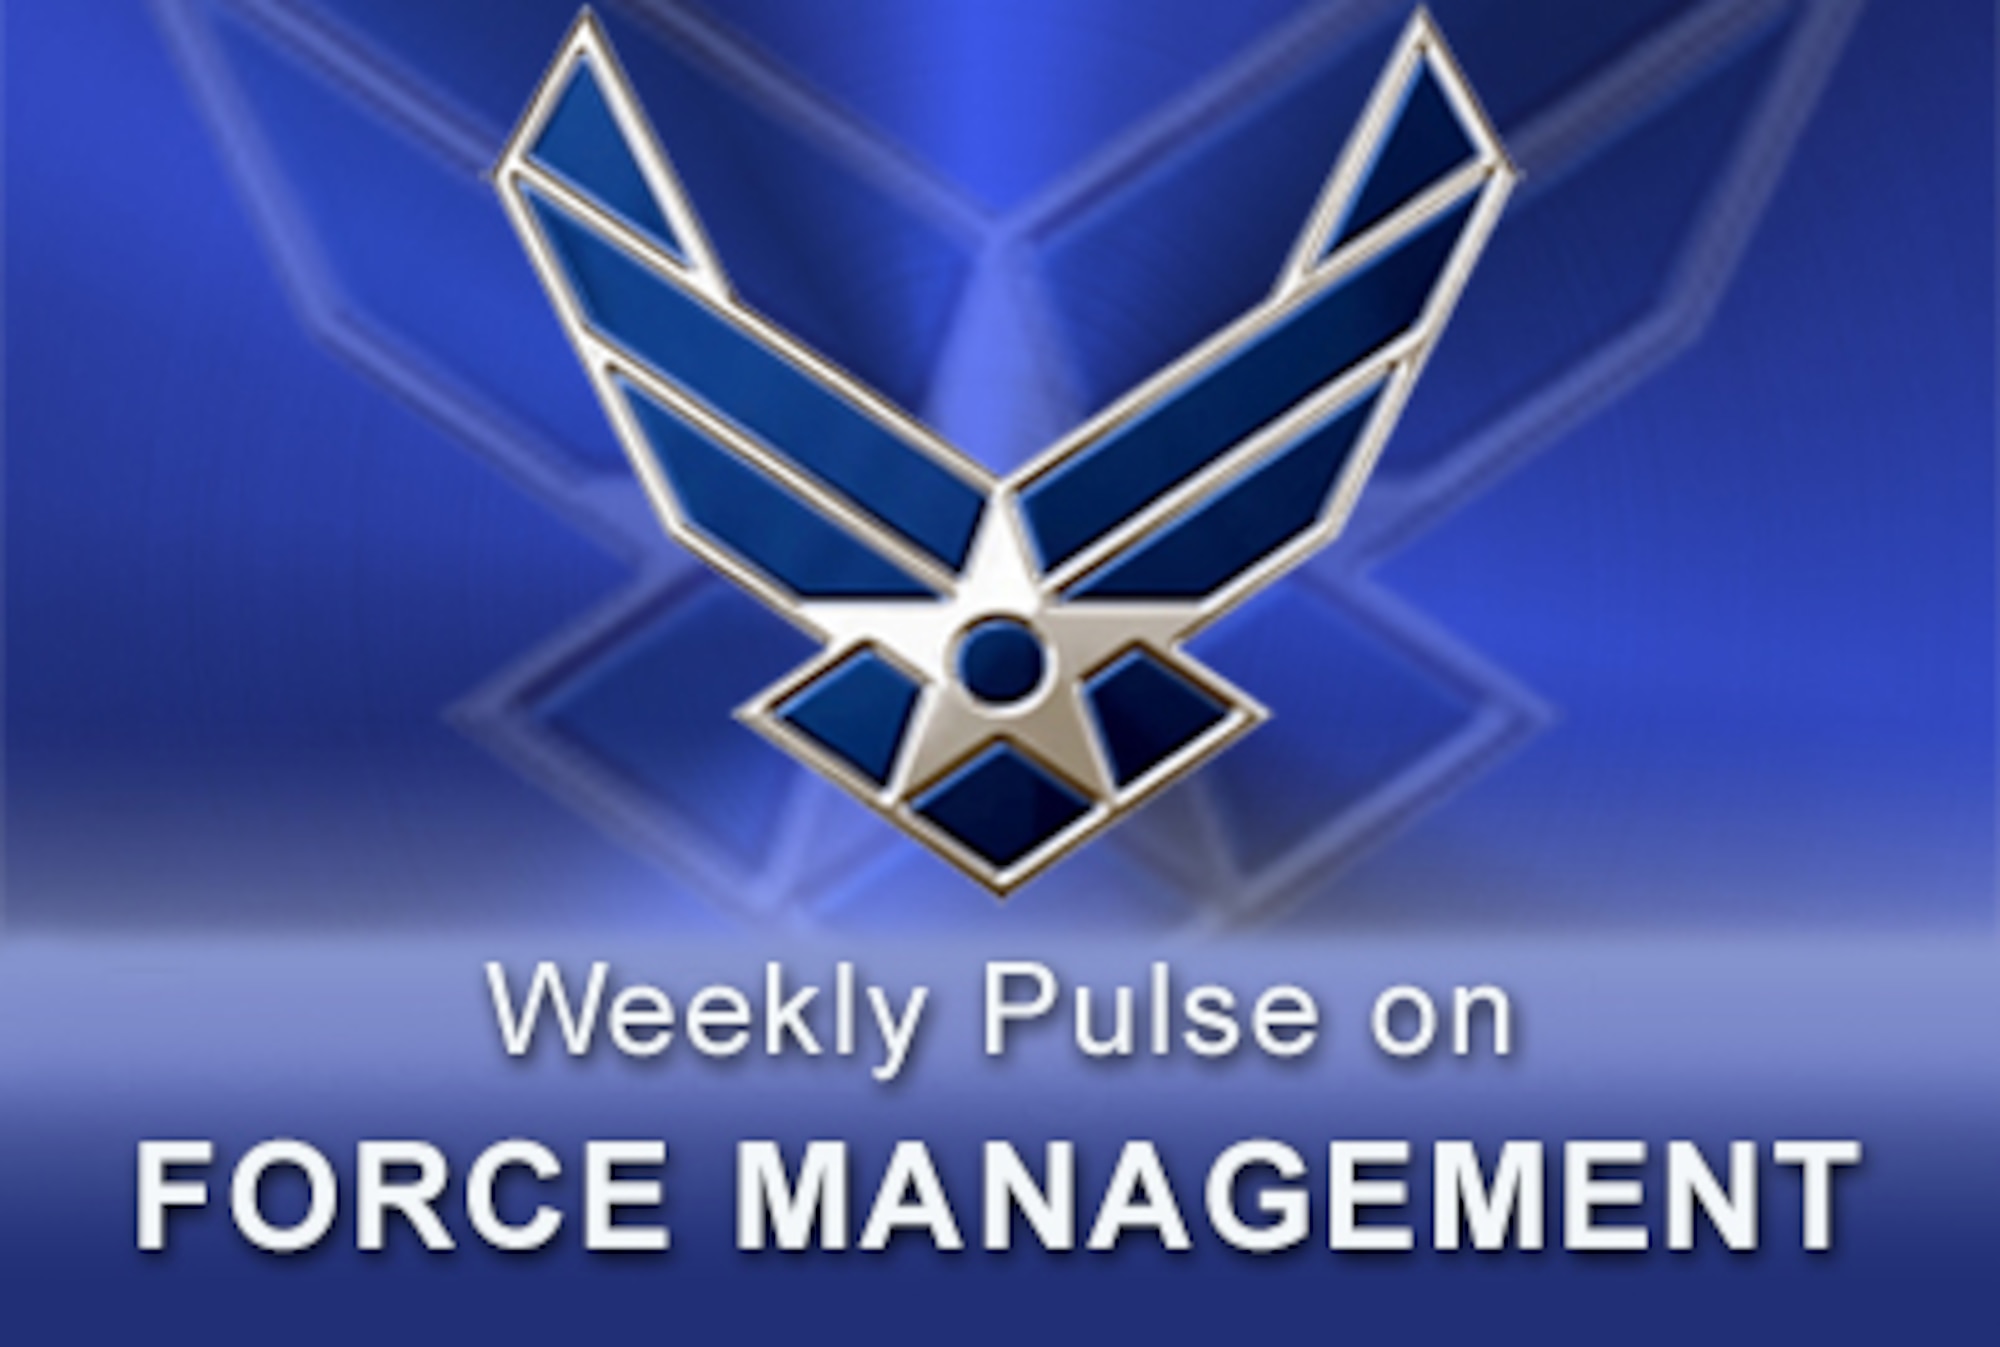 Updates to information on force management and other personnel programs will continue to be available on myPers at https://mypers.af.mil. Airmen can use the new force management graphic on the Air Force Portal, at https://my.af.mil, which will take them to updated matrices and force management program details. (Courtesy Graphic)